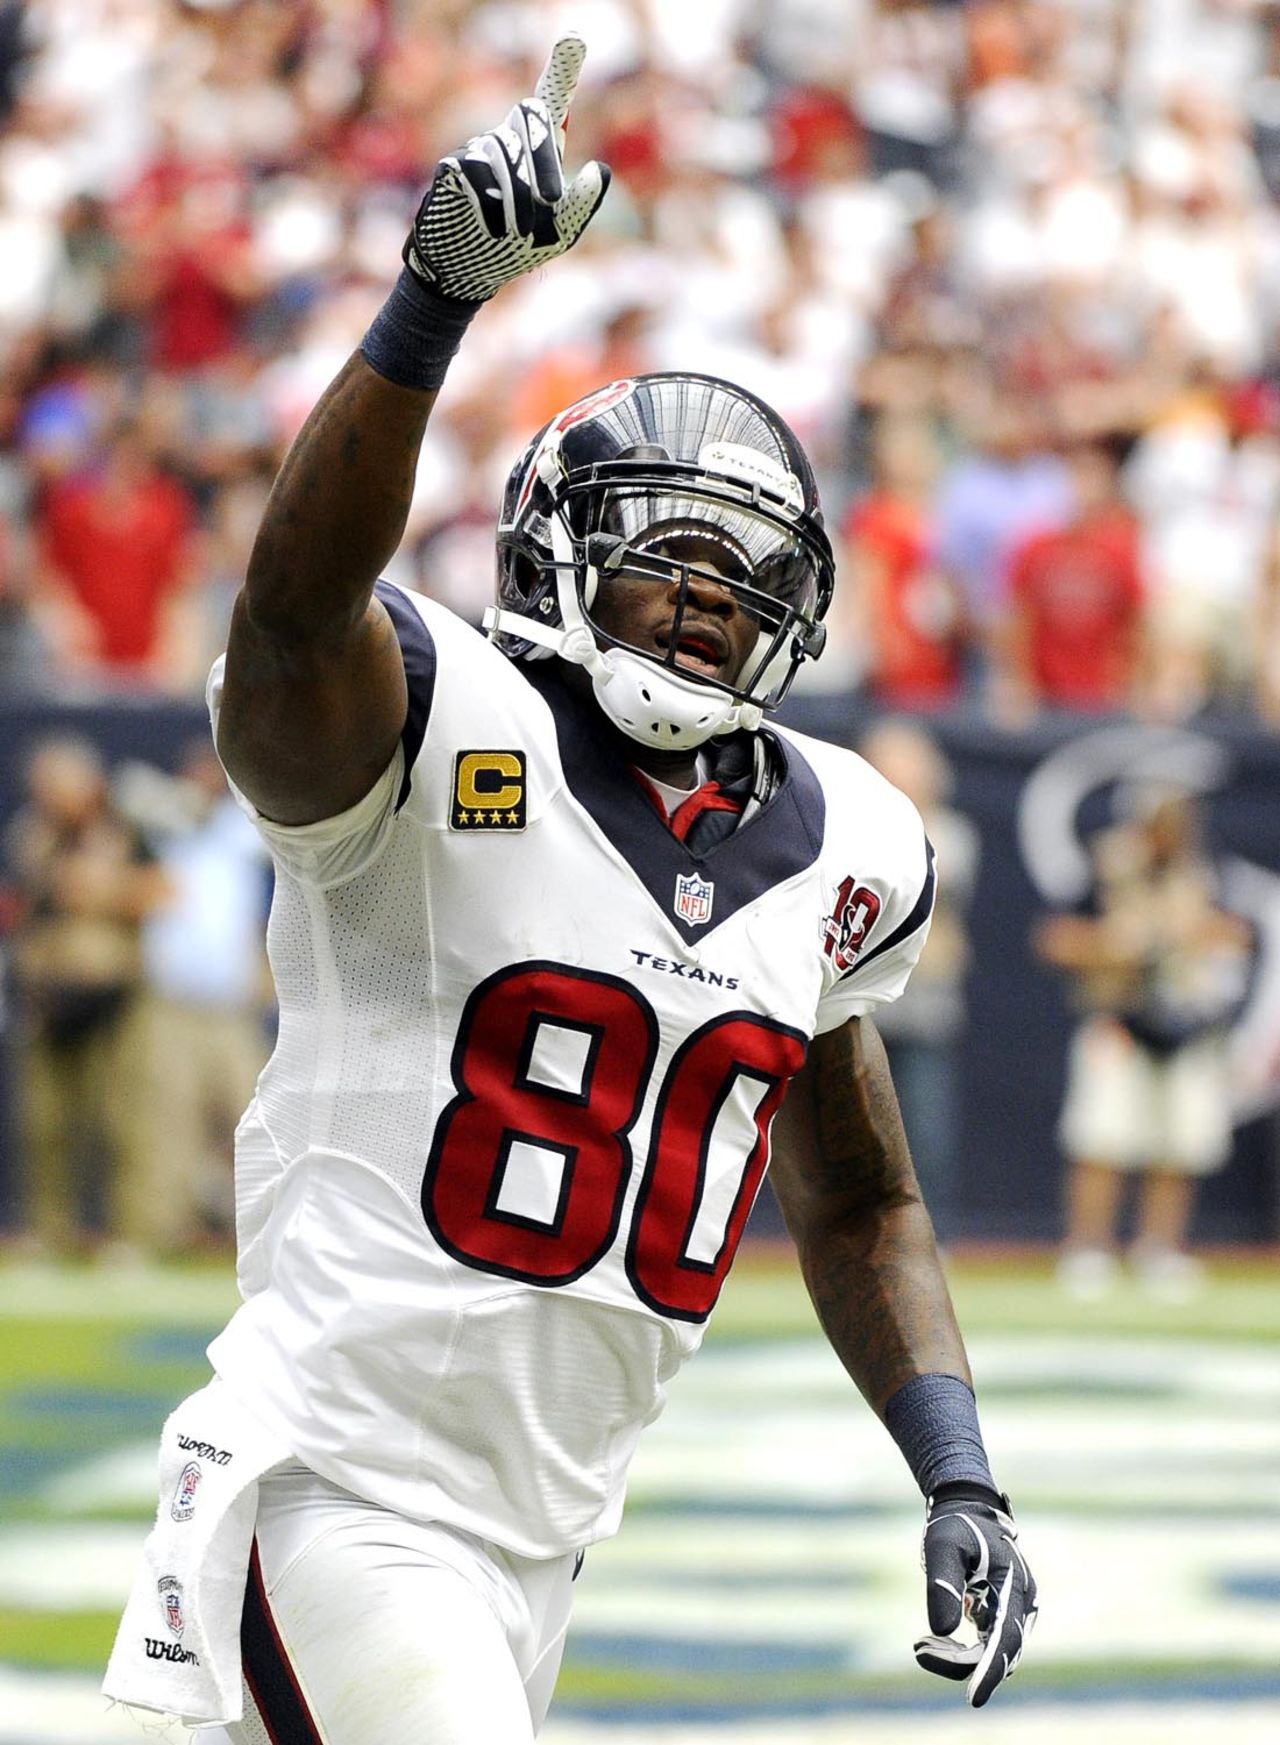 Andre Johnson Wallpapers